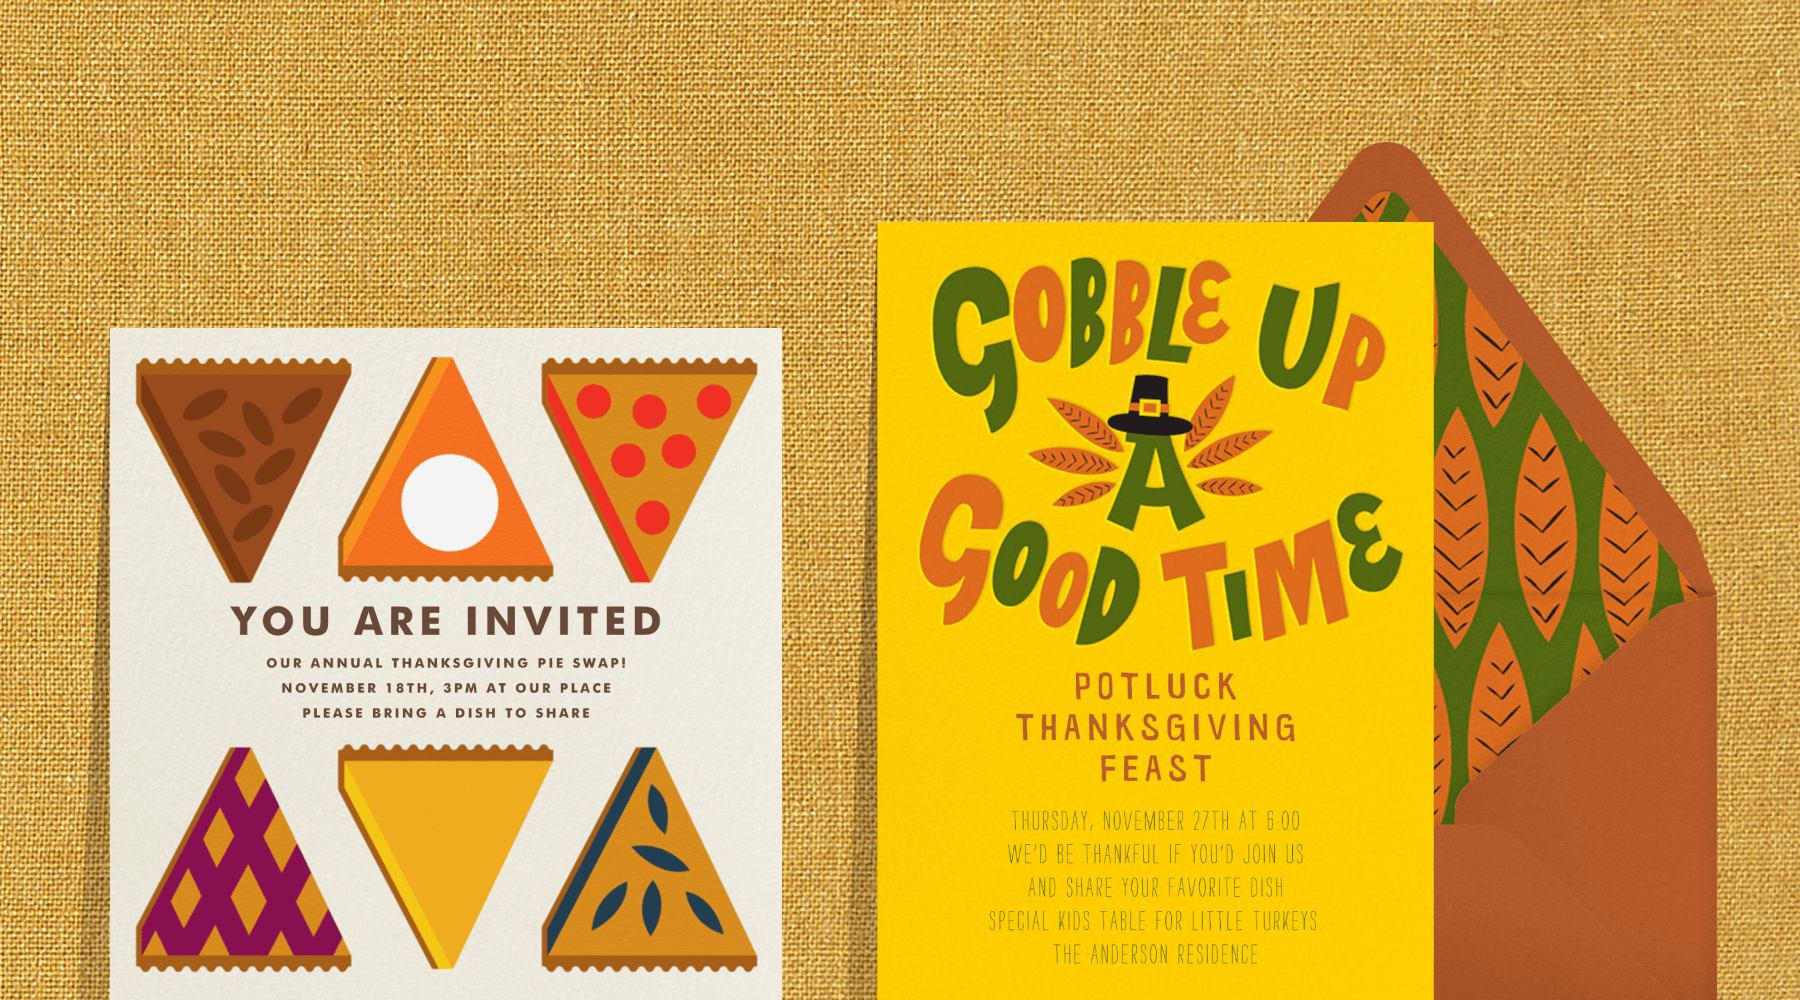 Two invitations on a yellow fabric background. On the left, a white card that reads “You are invited” to a pie swap with six simplified illustrations of autumnal pie slices. Right, a yellow invitation reads “gobble up a good time” with the “A” wearing a Pilgrim hat and turkey feathers beside a brown envelope with matching feather liner.